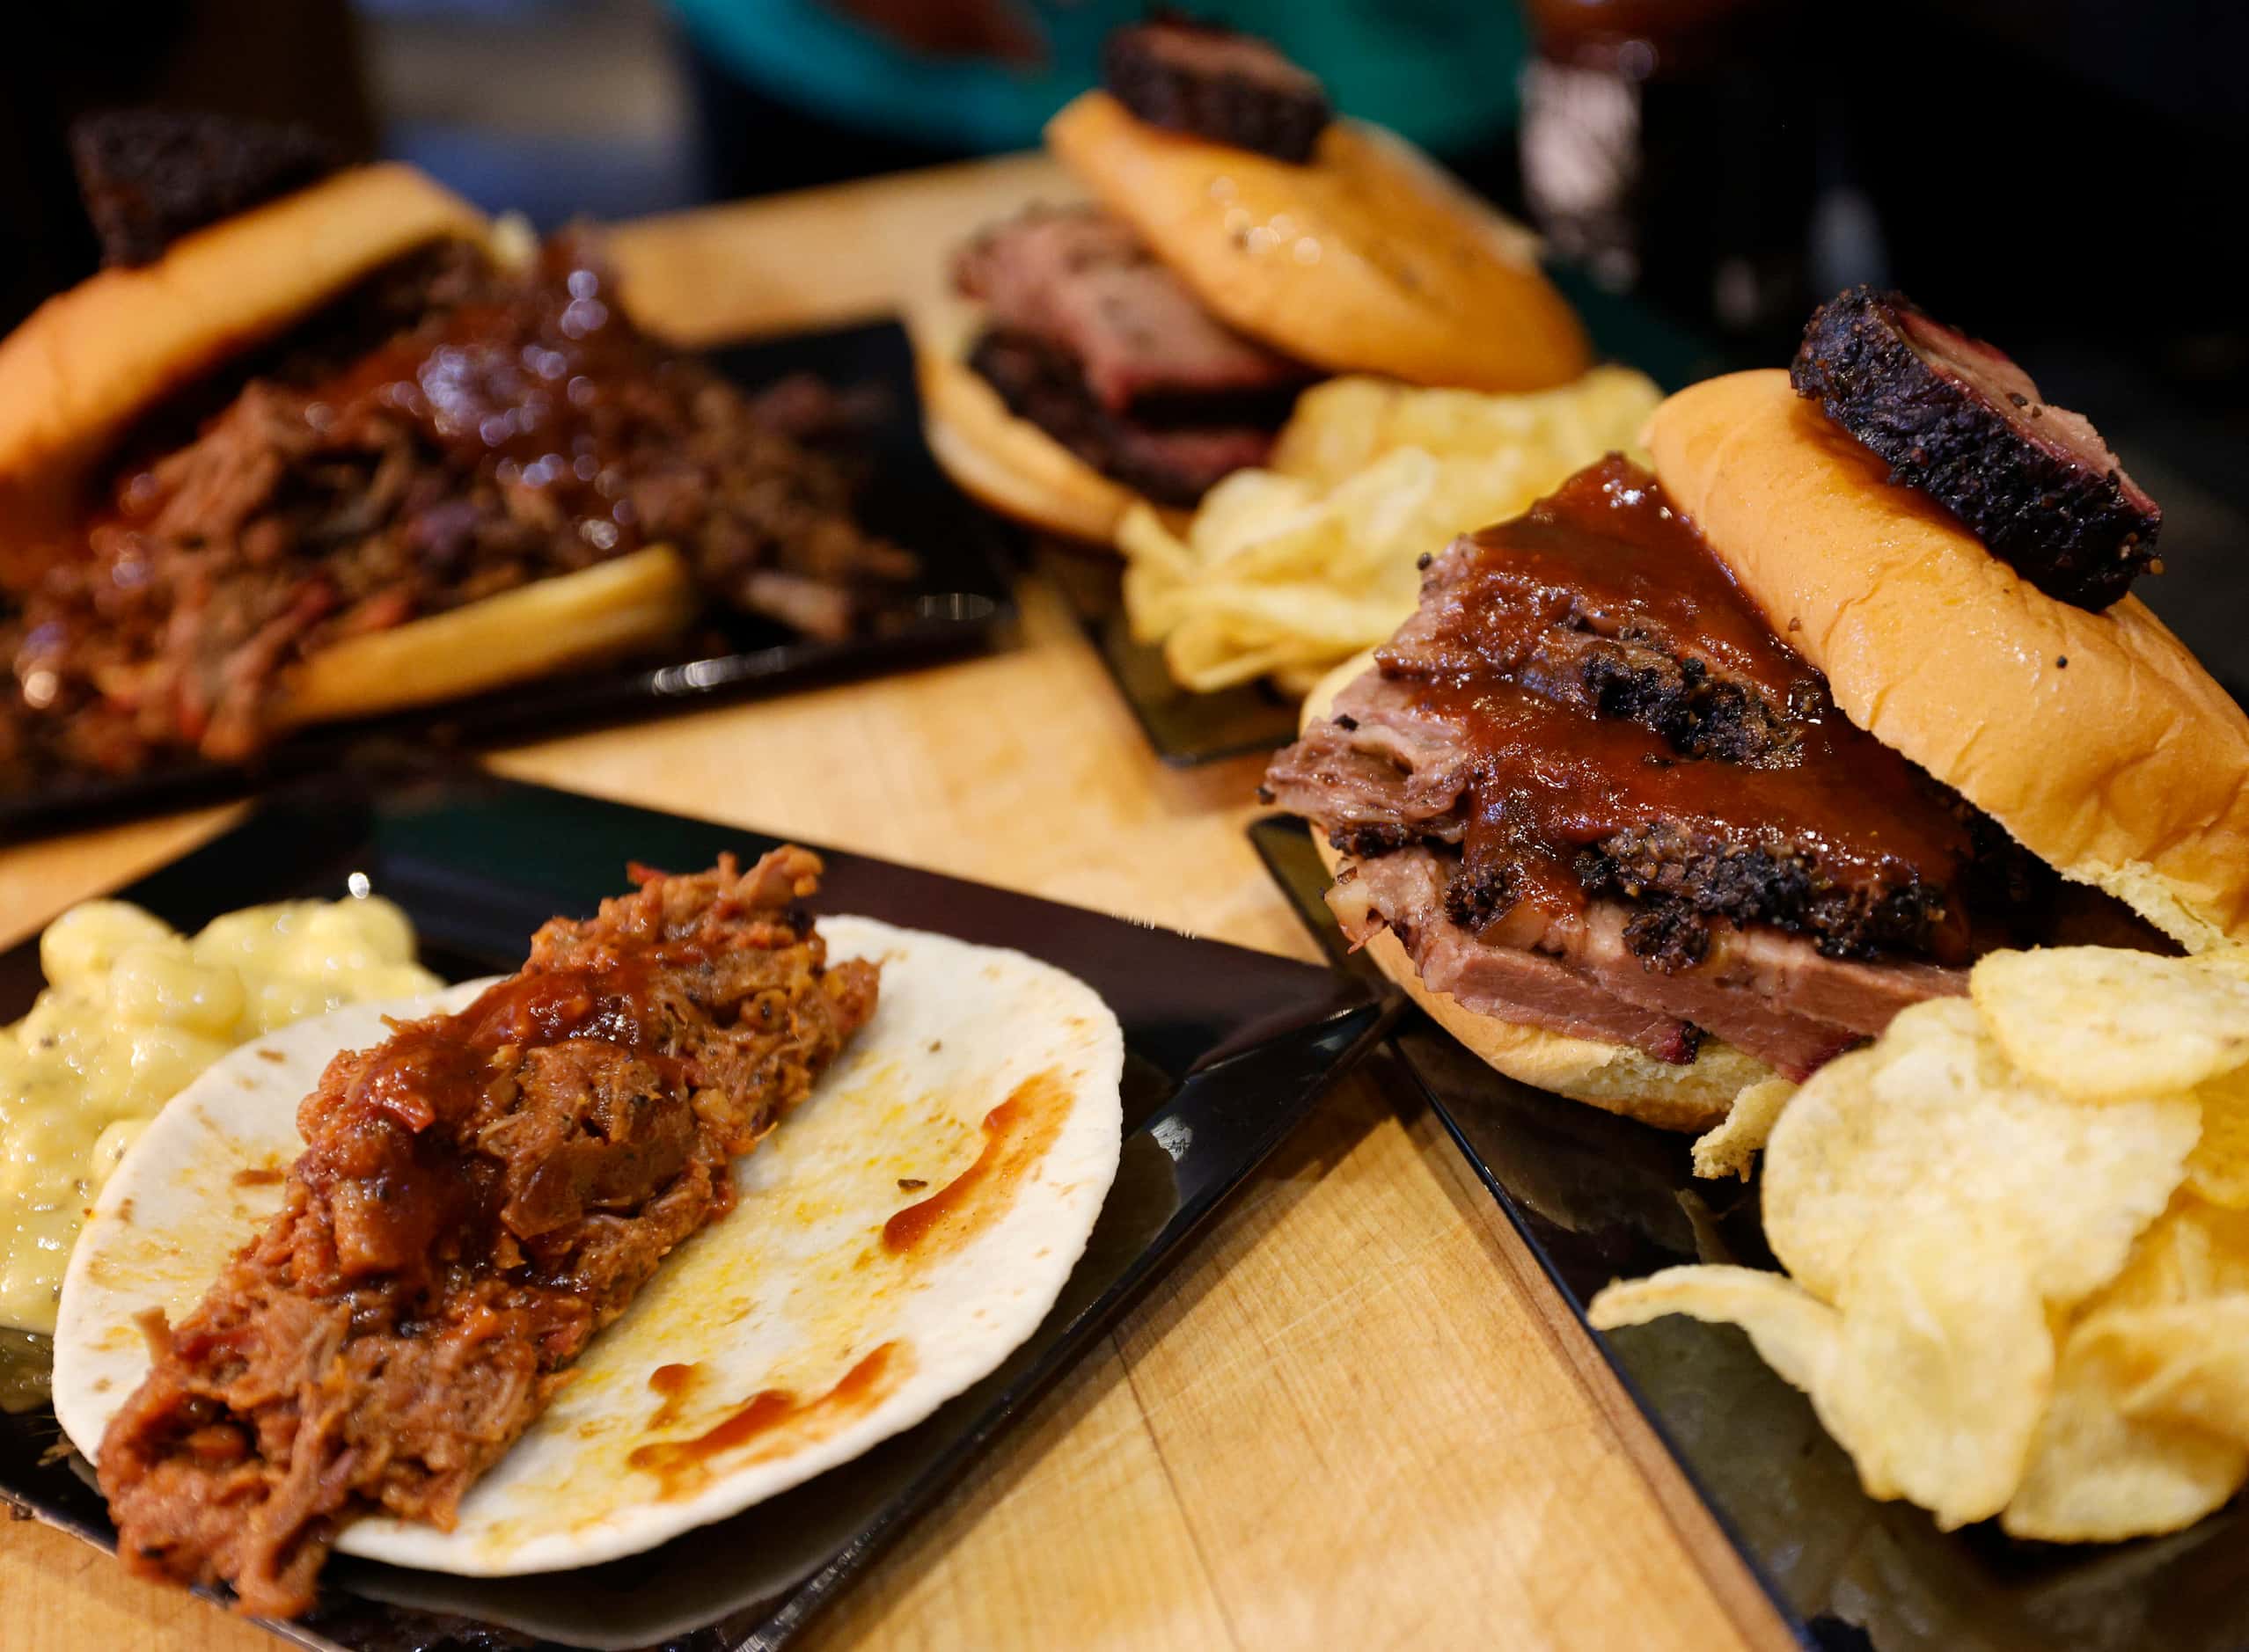 Zavala’s Barbecue menu items at the AAC include: a brisket sandwich, right, Sloppy Juan...